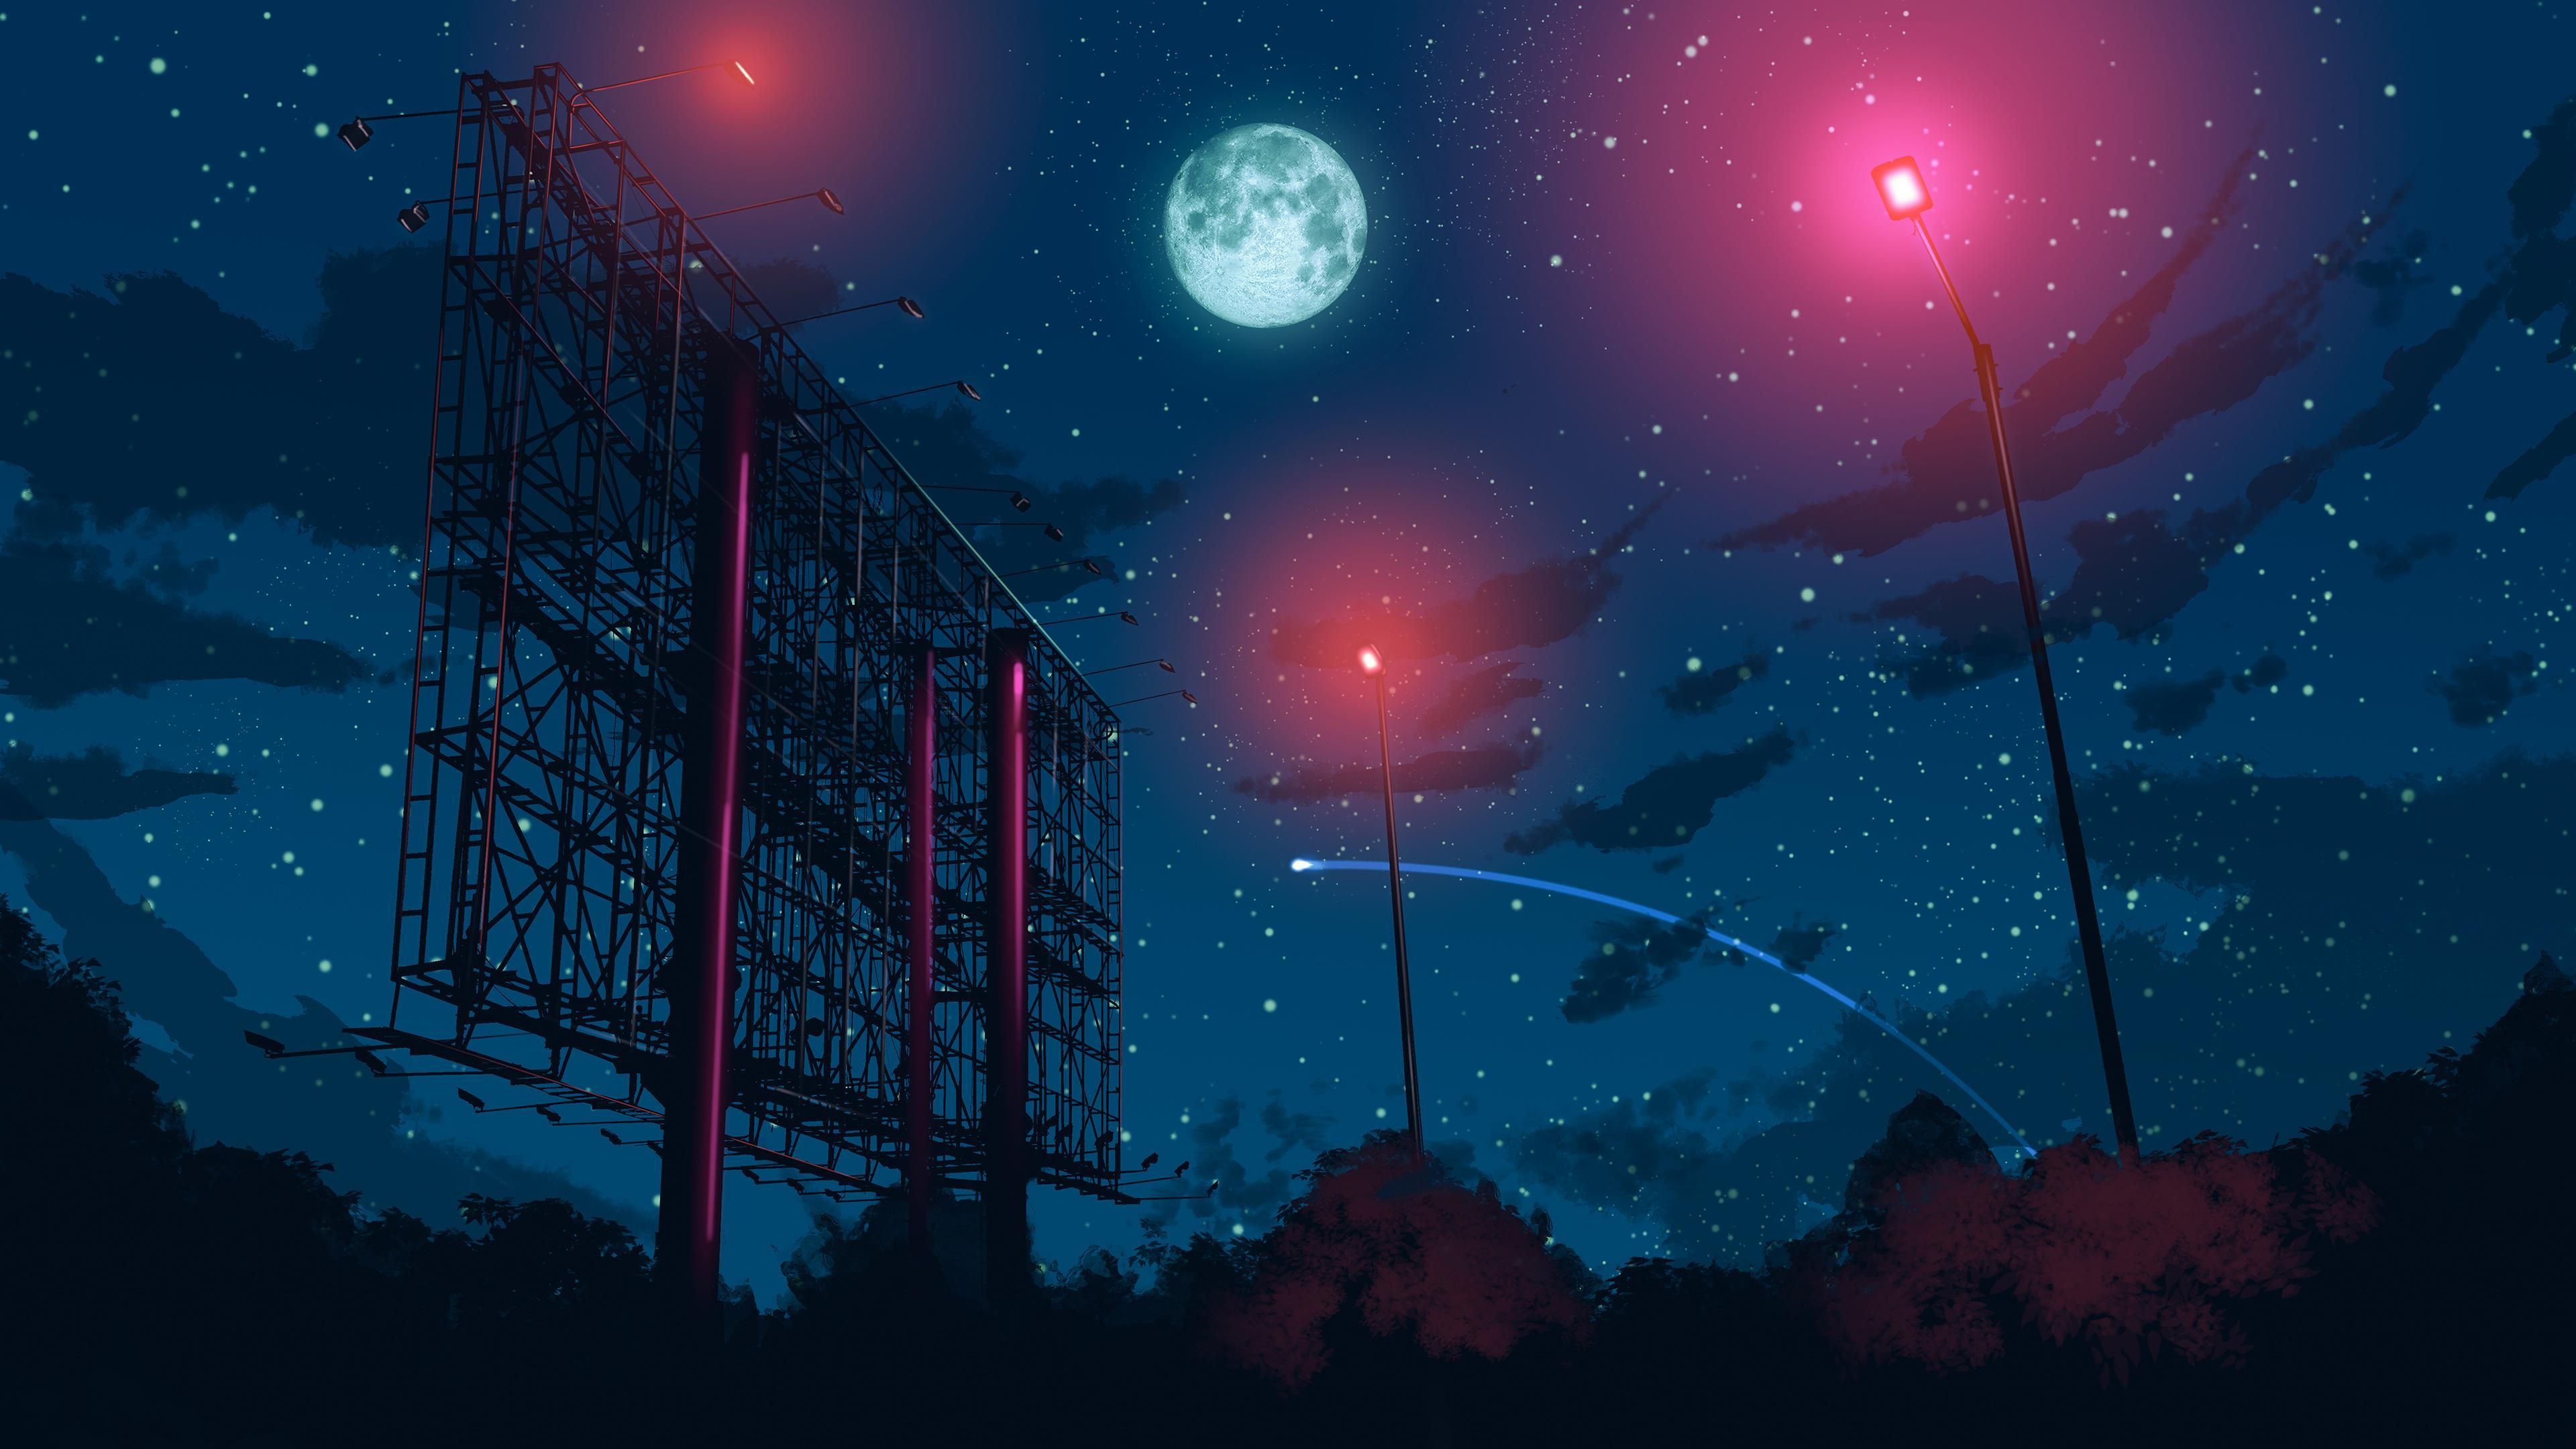 Anime Style Night Sky [3840x2160] (Uncropped 6K Version Link In Comment). Sky Aesthetic, Night Skies, Sky Anime